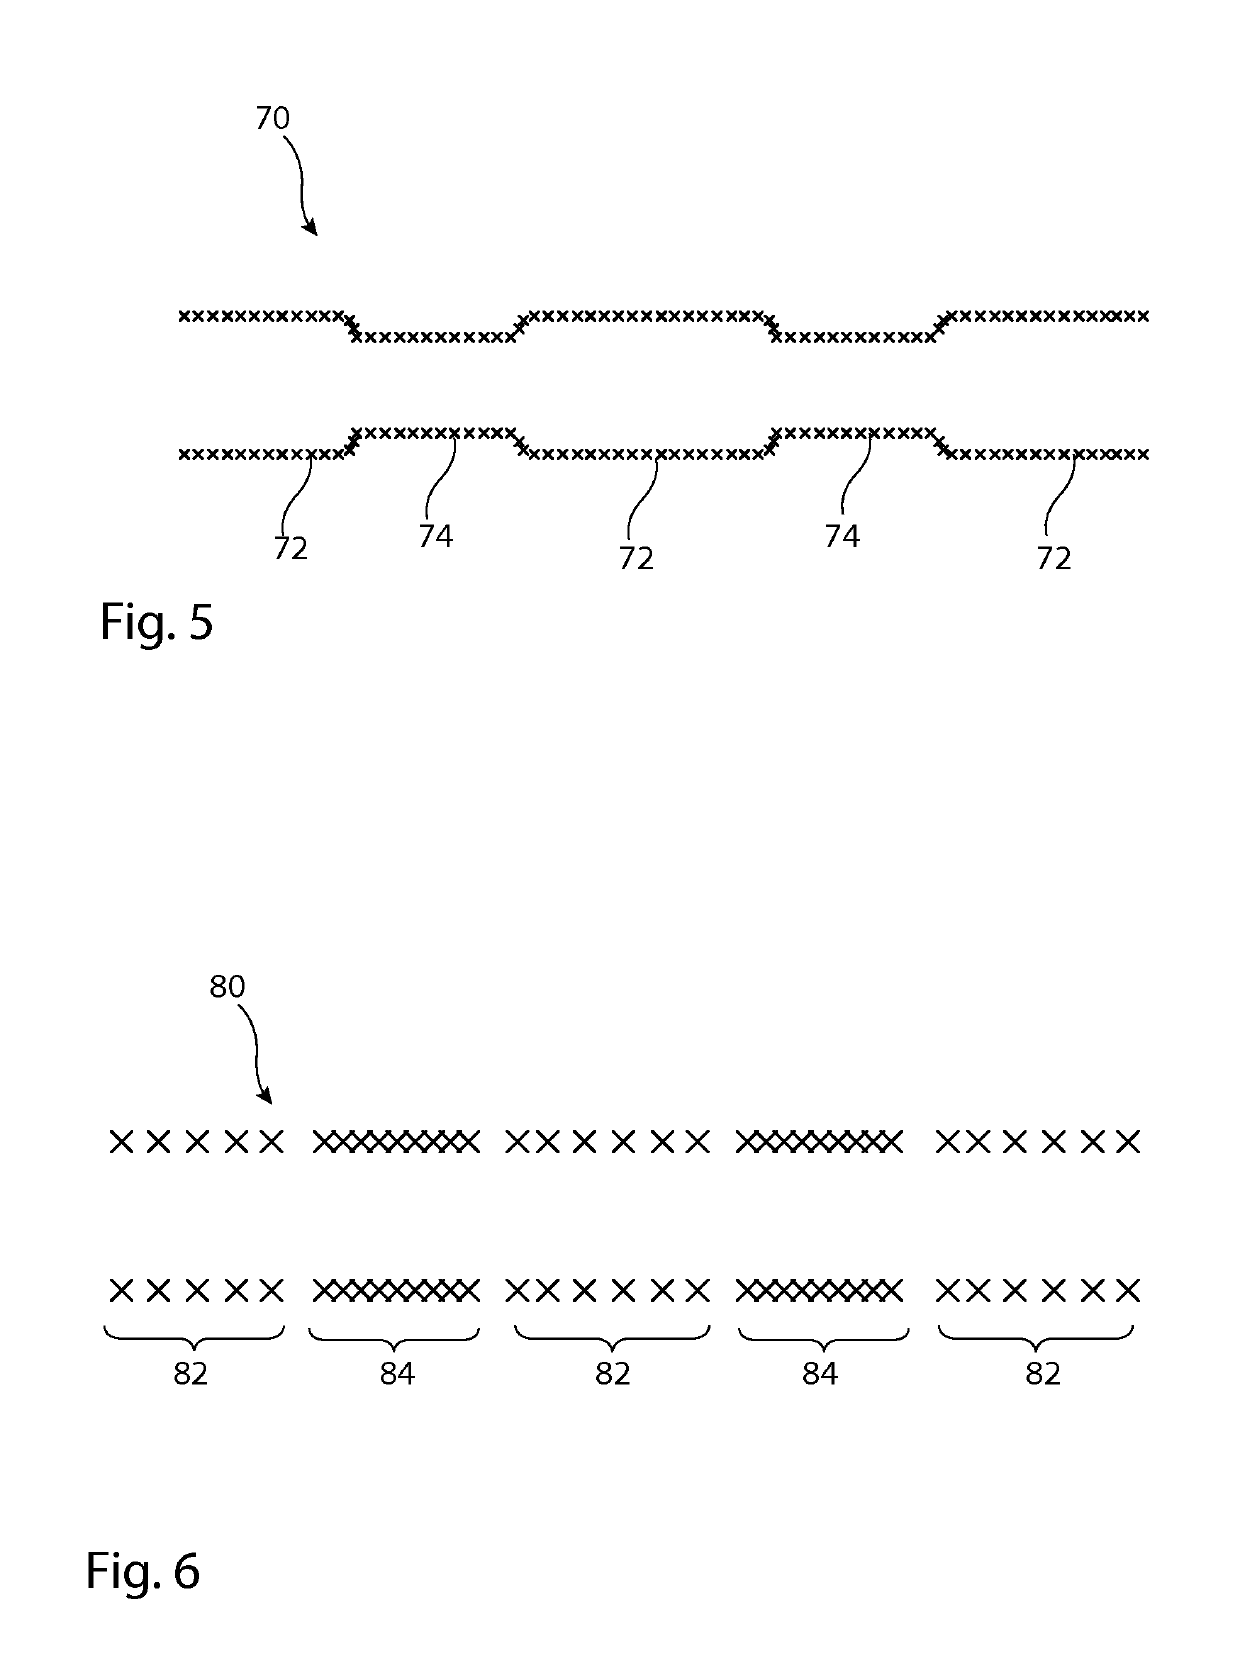 Delivery system for implantable medical device